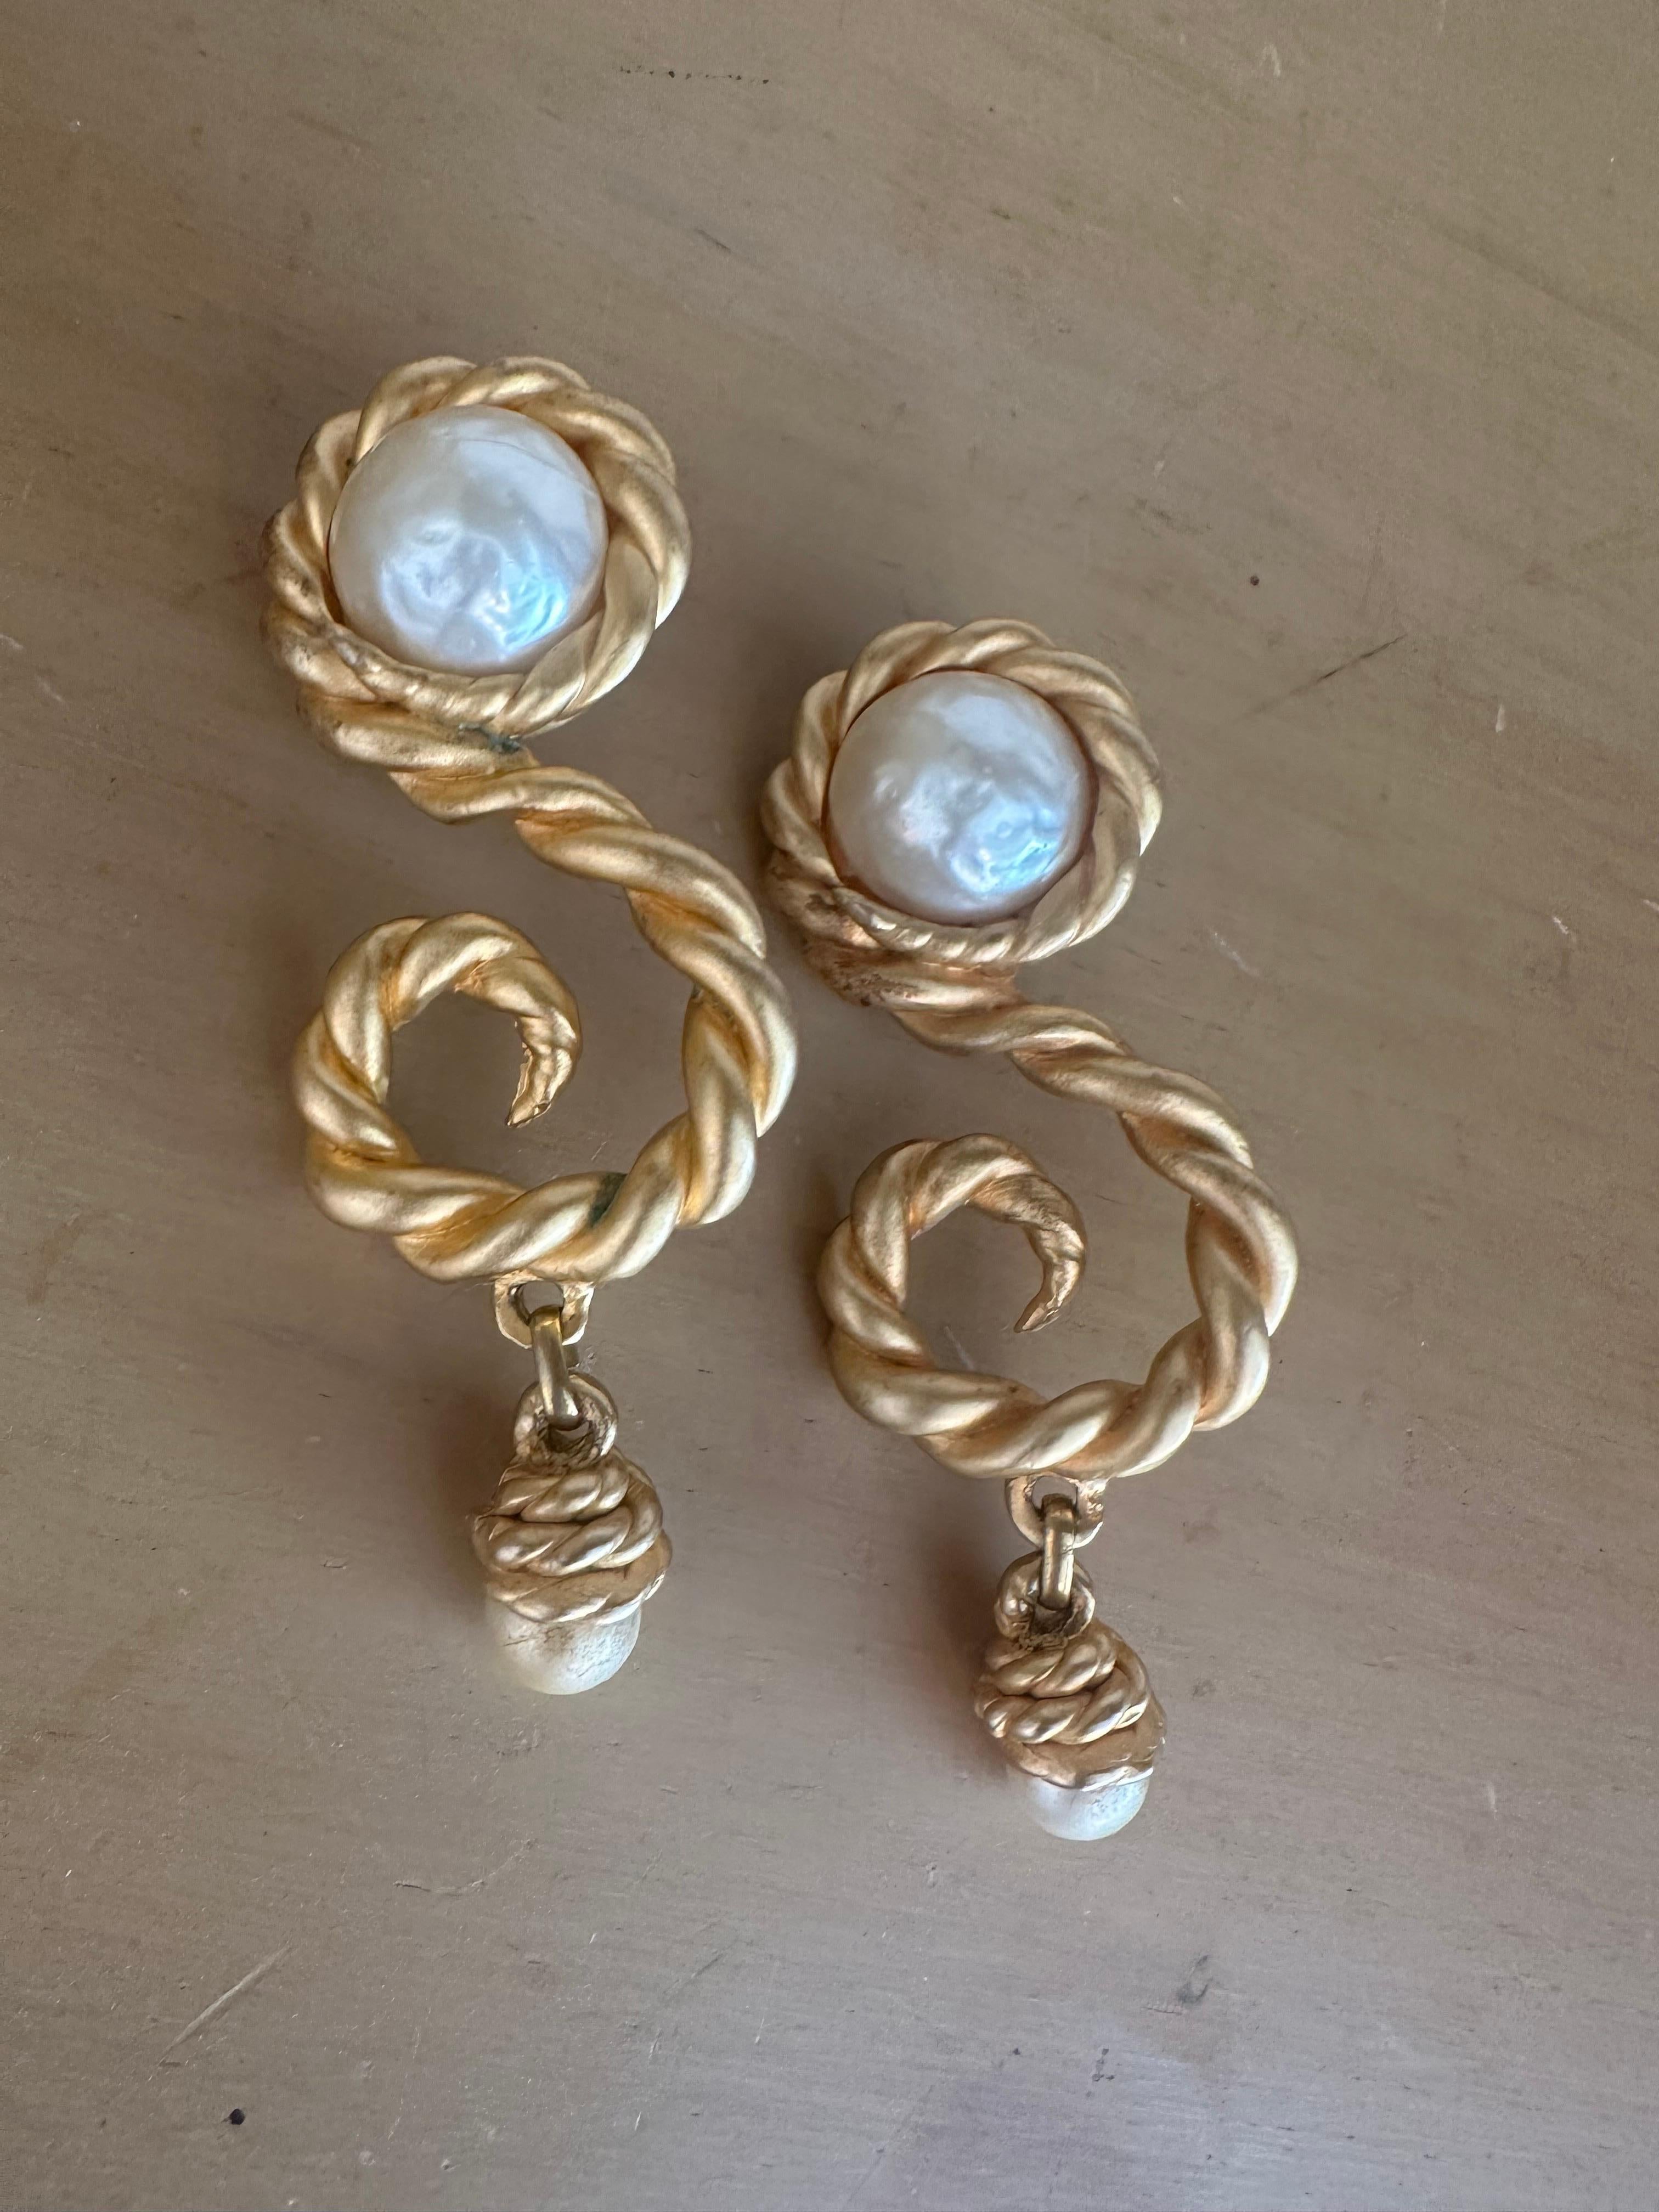 
Chanel Spring/Summer 1990 Runway Rope Twist Gripoix Earrings

- Matte Gold Finish, Gripoix Baroque Glass Pearls
- Collection: Spring Summer 1990
- Signature: Engraved plaque on one back “CHANEL CC MADE IN FRANCE”
- Dimensions: Length  4.8 inches